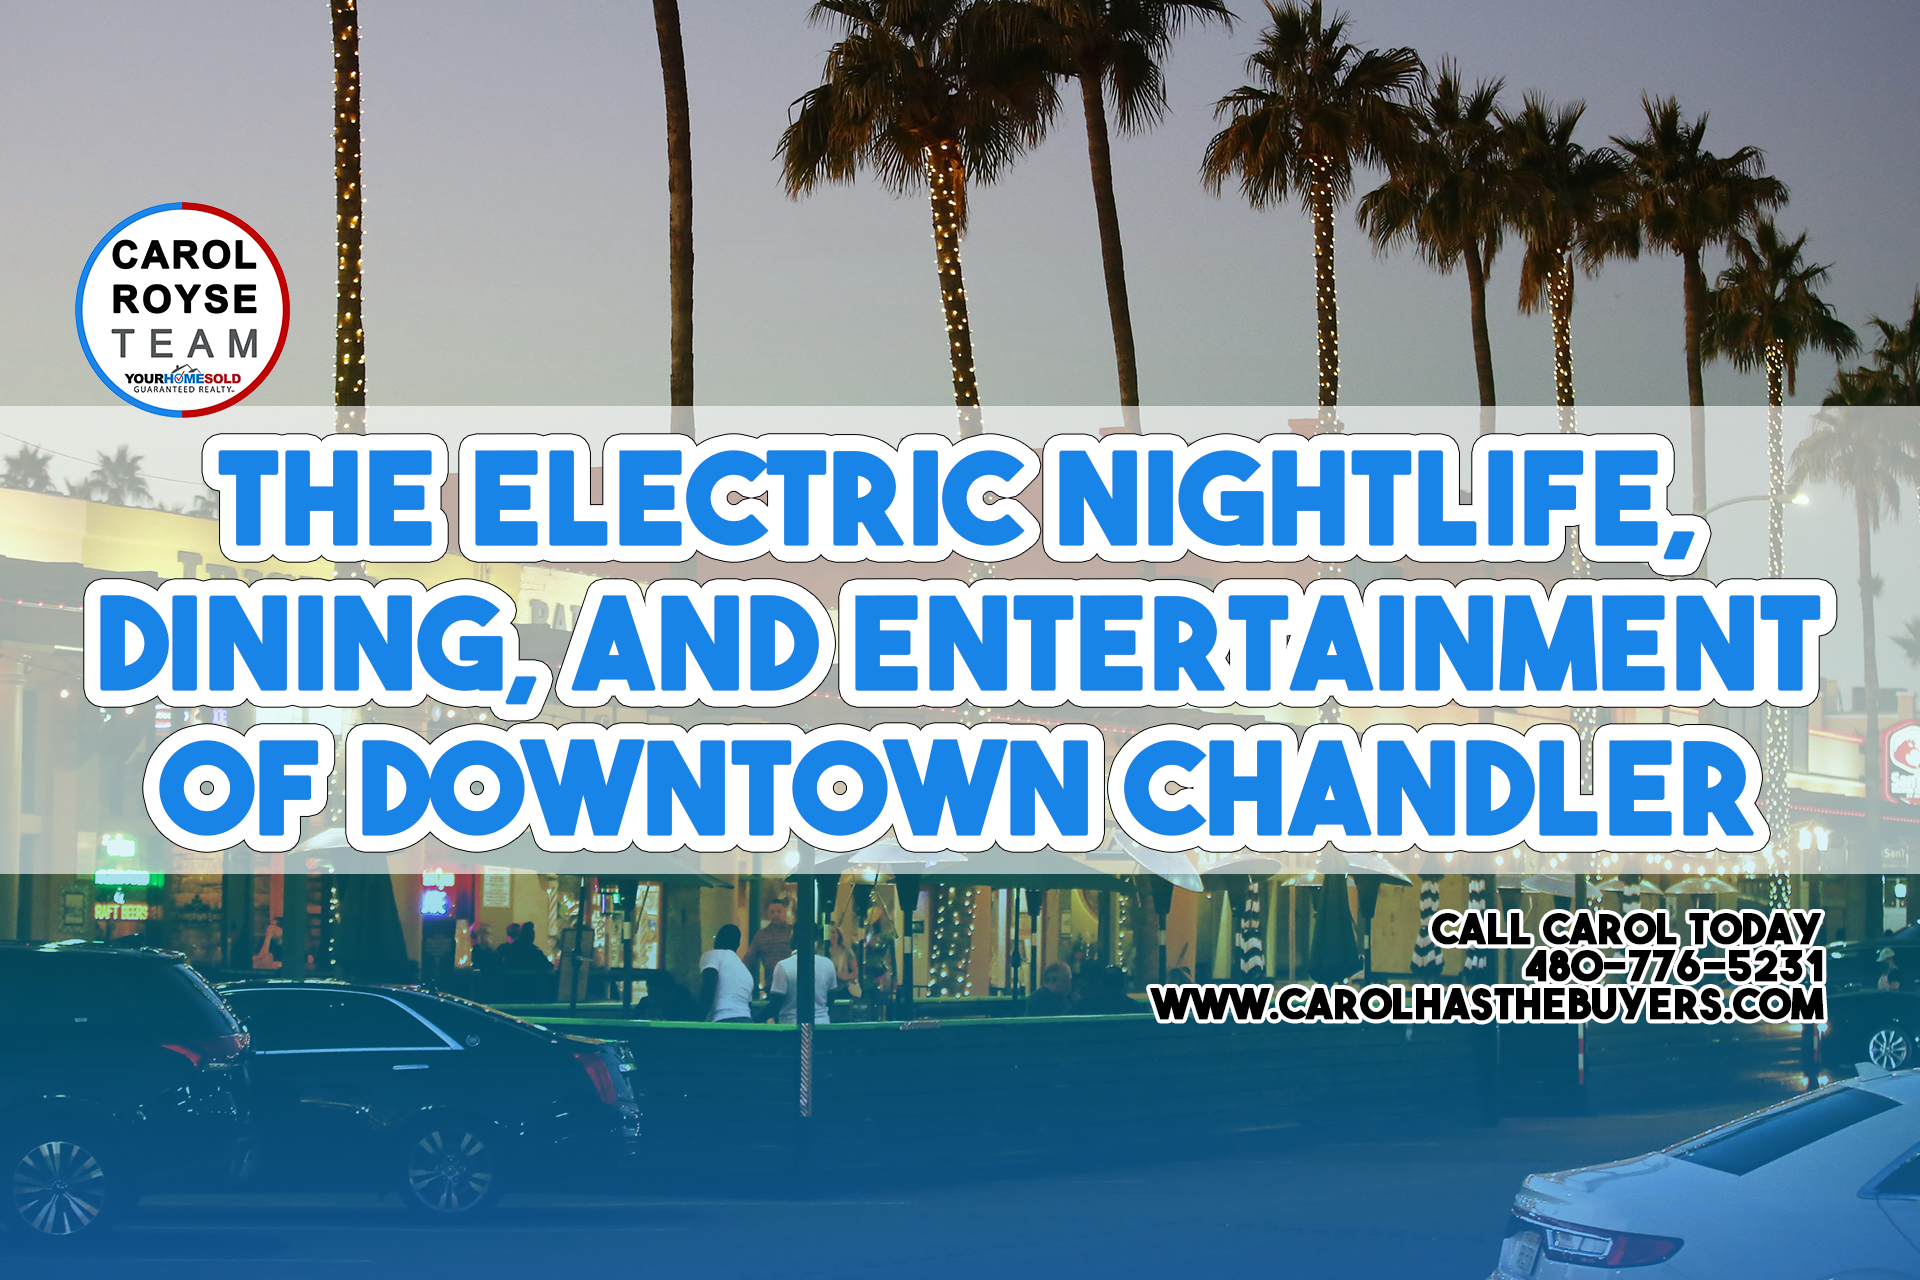 The Electric Nightlife, Dining, and Entertainment of Downtown Chandler